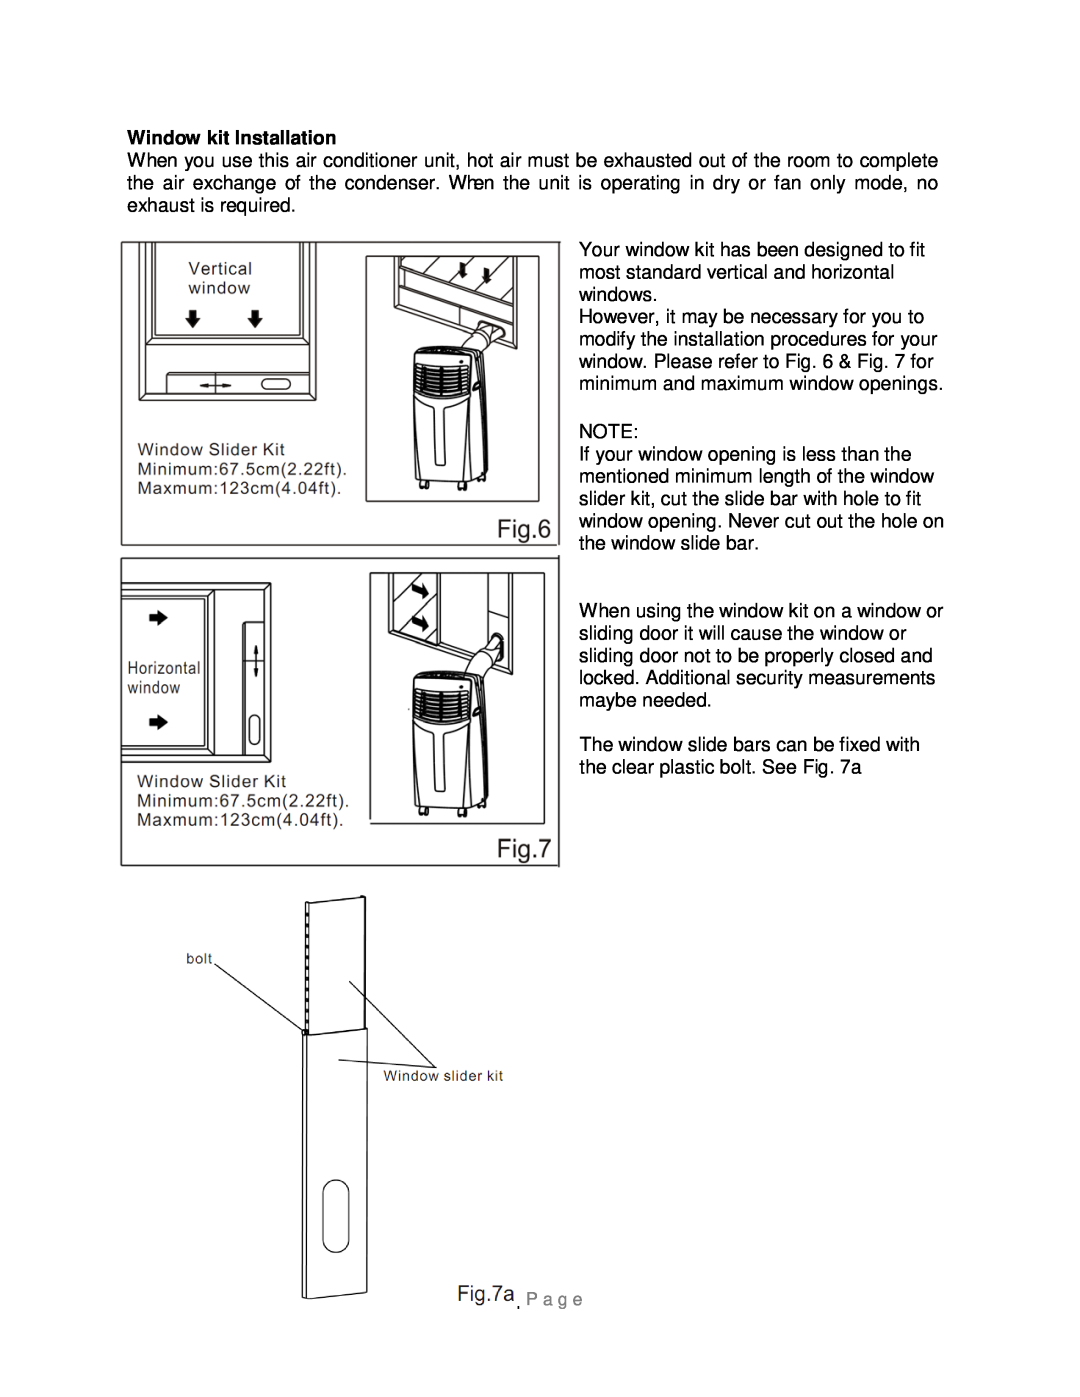 Whynter ARC-08WB instruction manual Window kit Installation, P a g e 